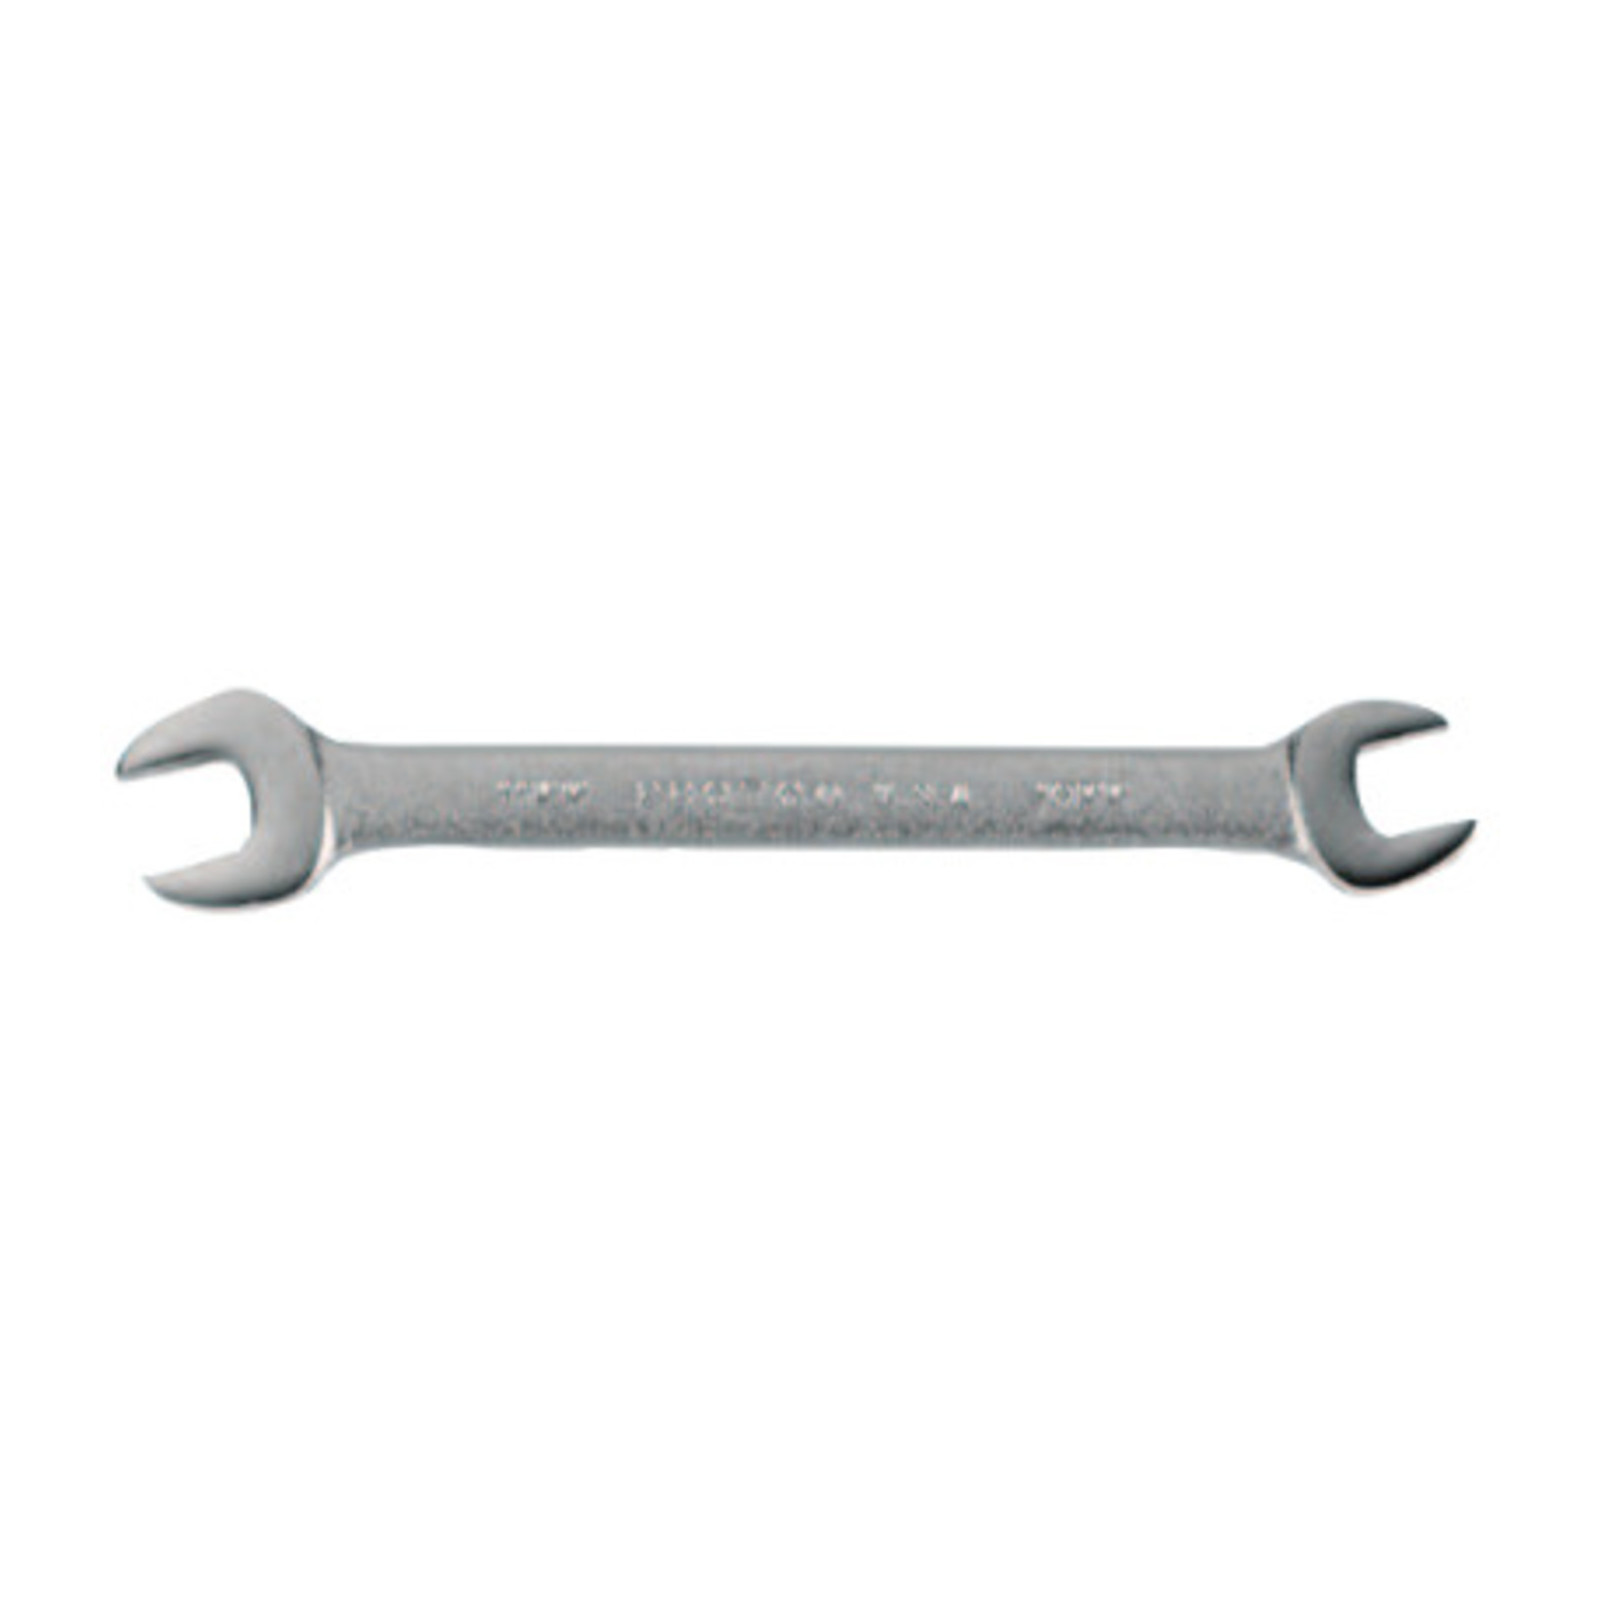 Stanley Proto - 16 x 17mm, Satin Finish, Open End Wrench 8-1/8 Inch Overall Length, Double End Head, 15 Head Angle